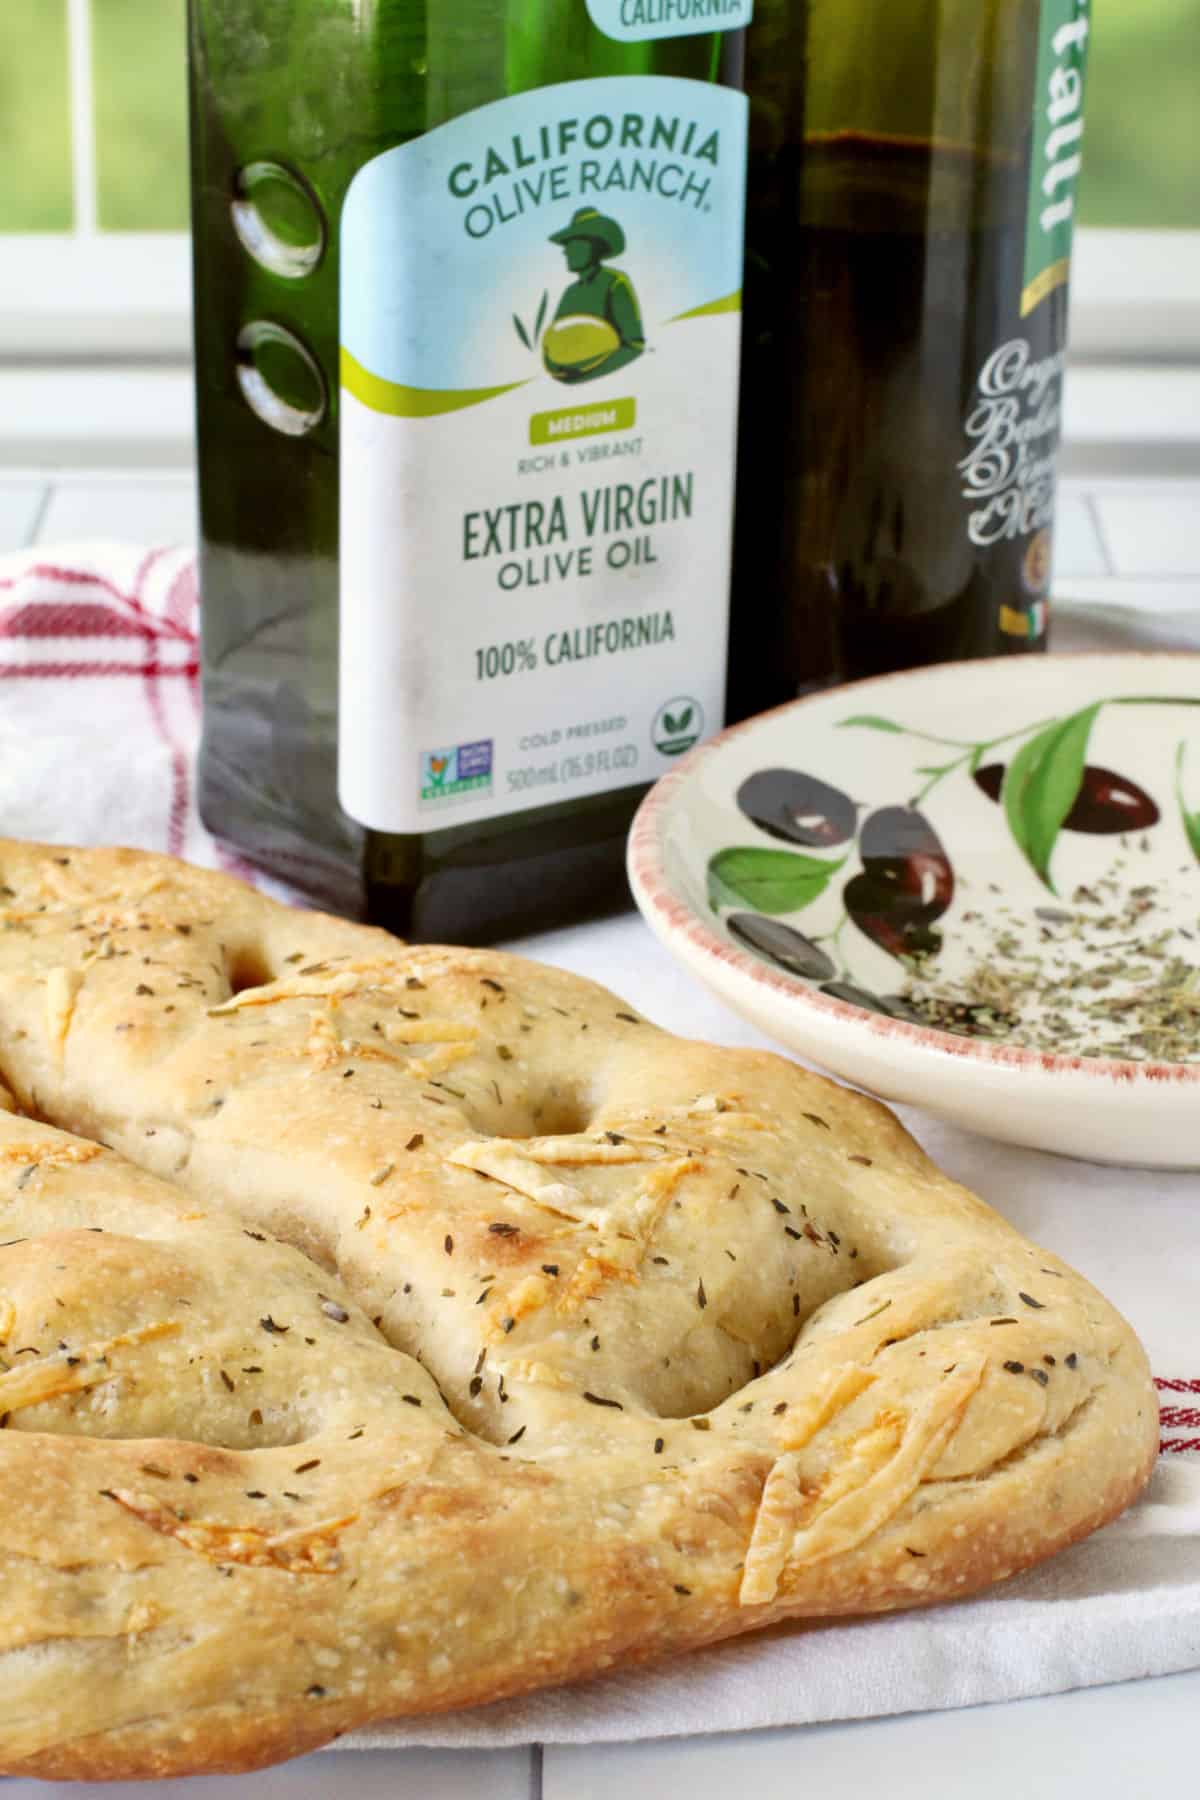 Fougasse Bread with Herbs de Provence and Gruyère Cheese with an olive oil bottle.